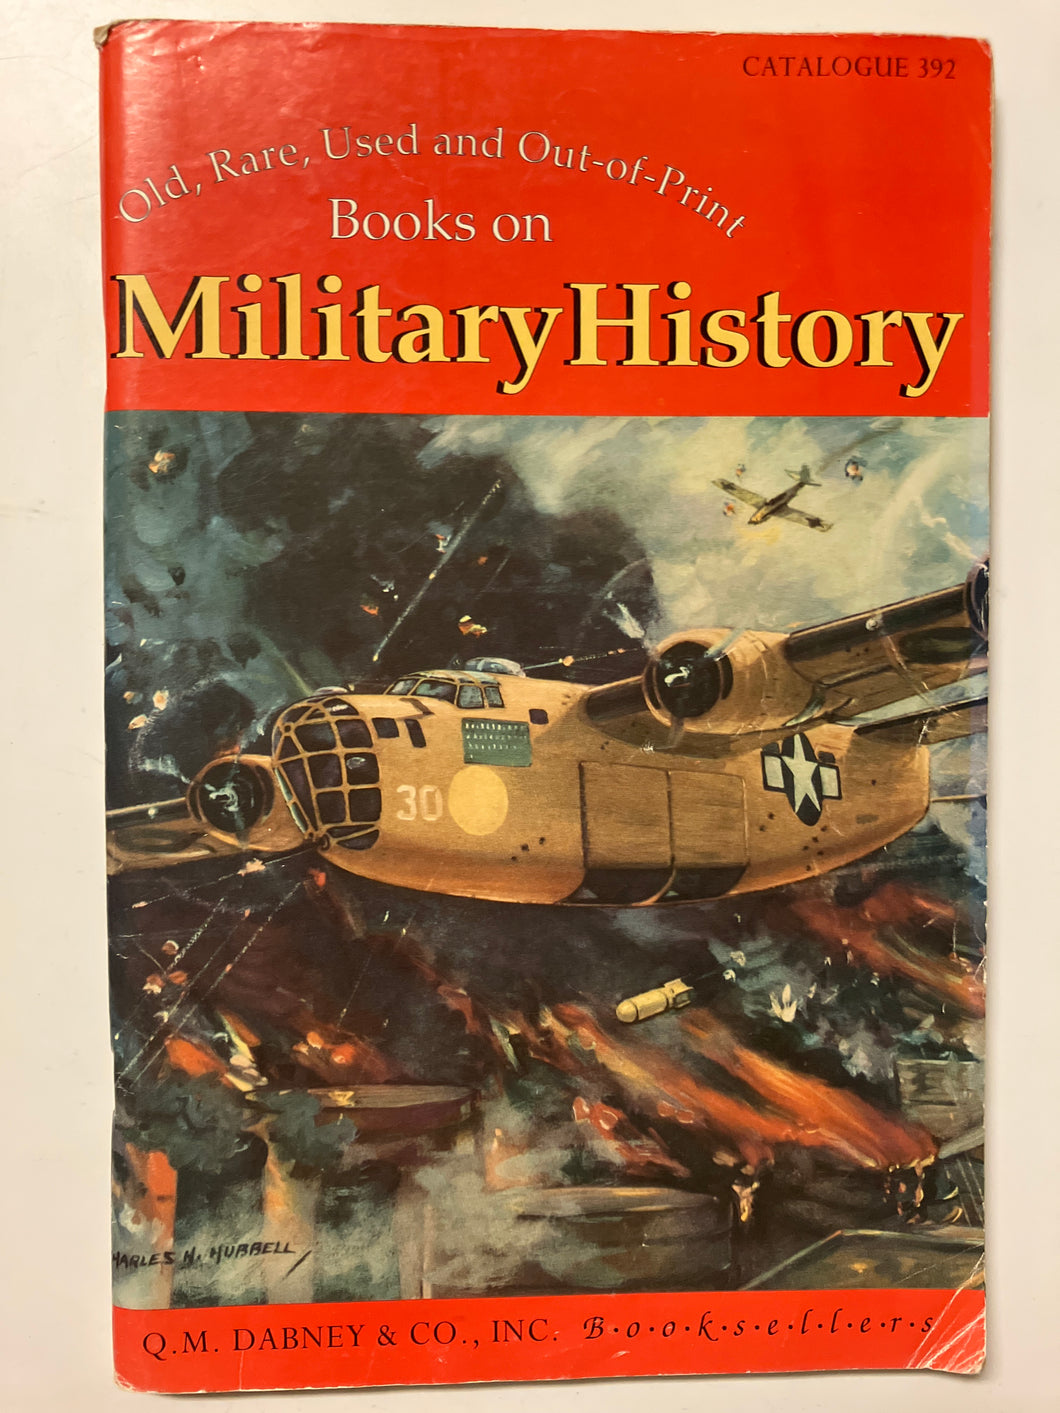 Old, Used and Rare Books on Military History Catalogue 392 - Slick Cat Books 